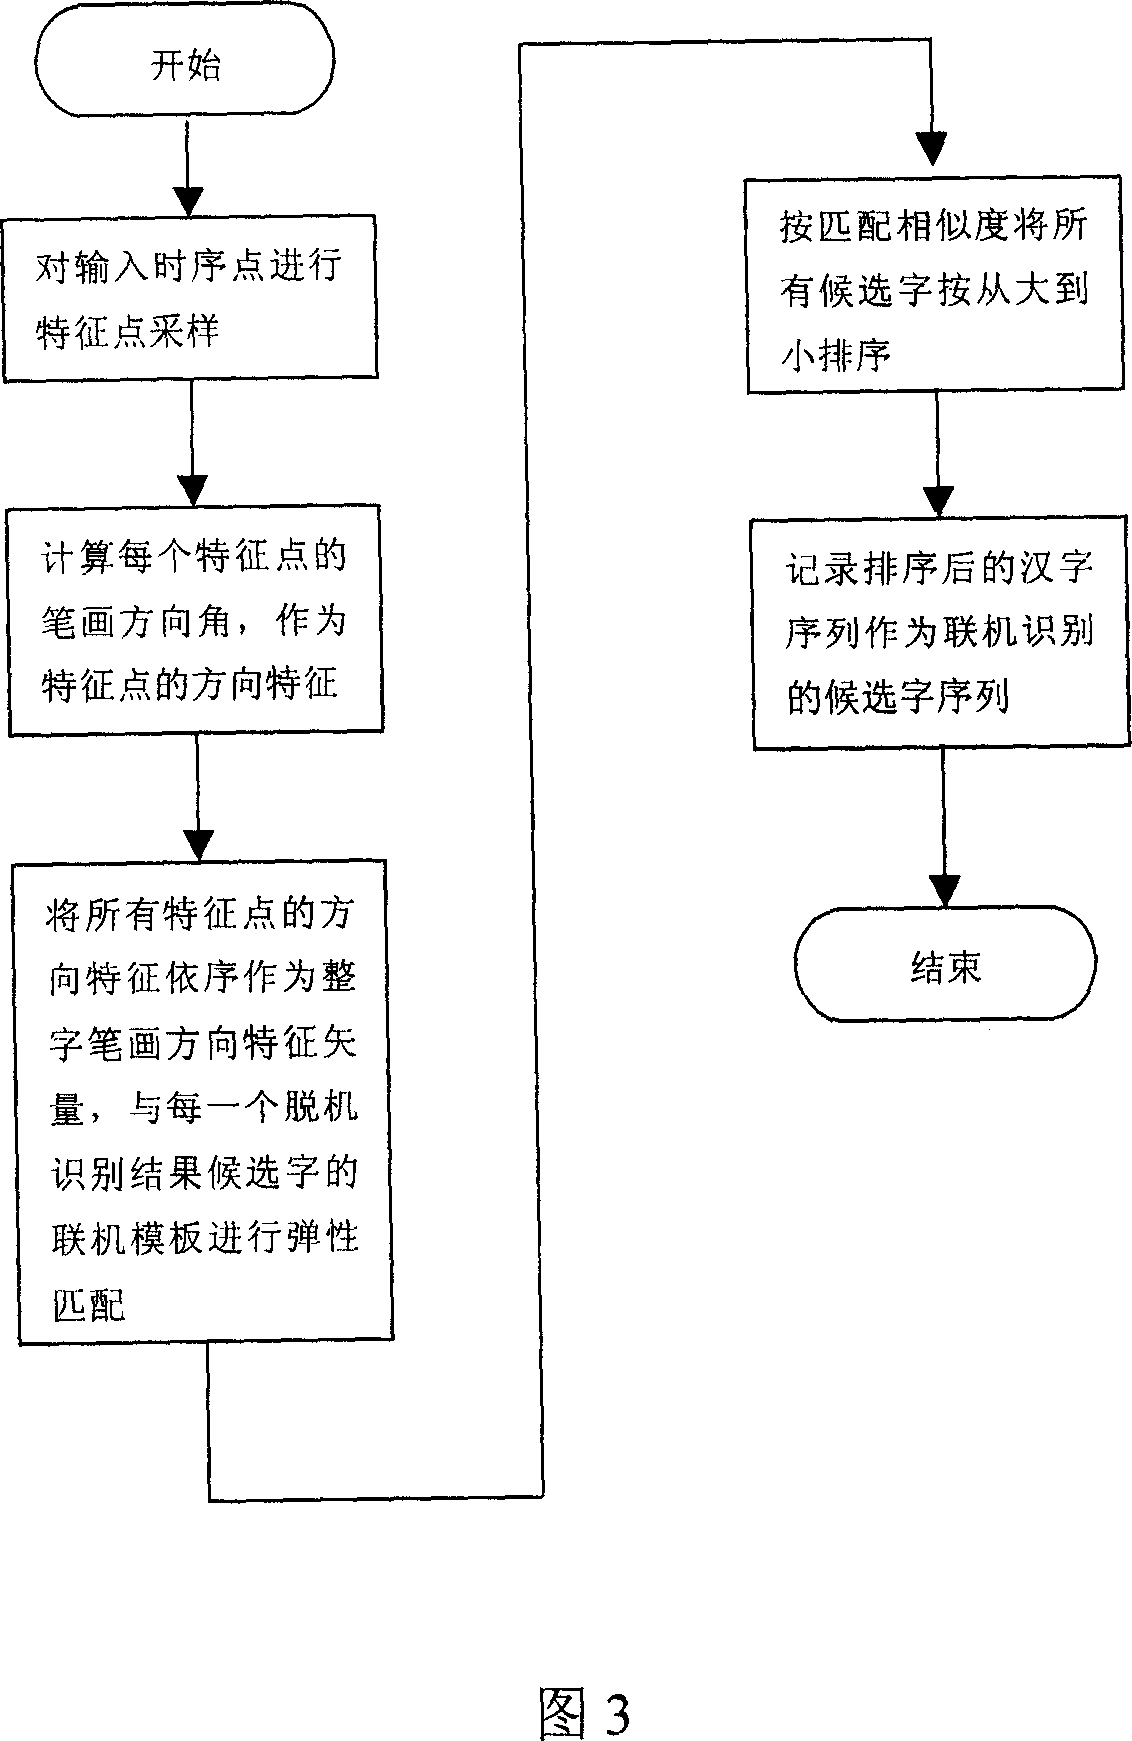 Method for identifying hand-writing characters